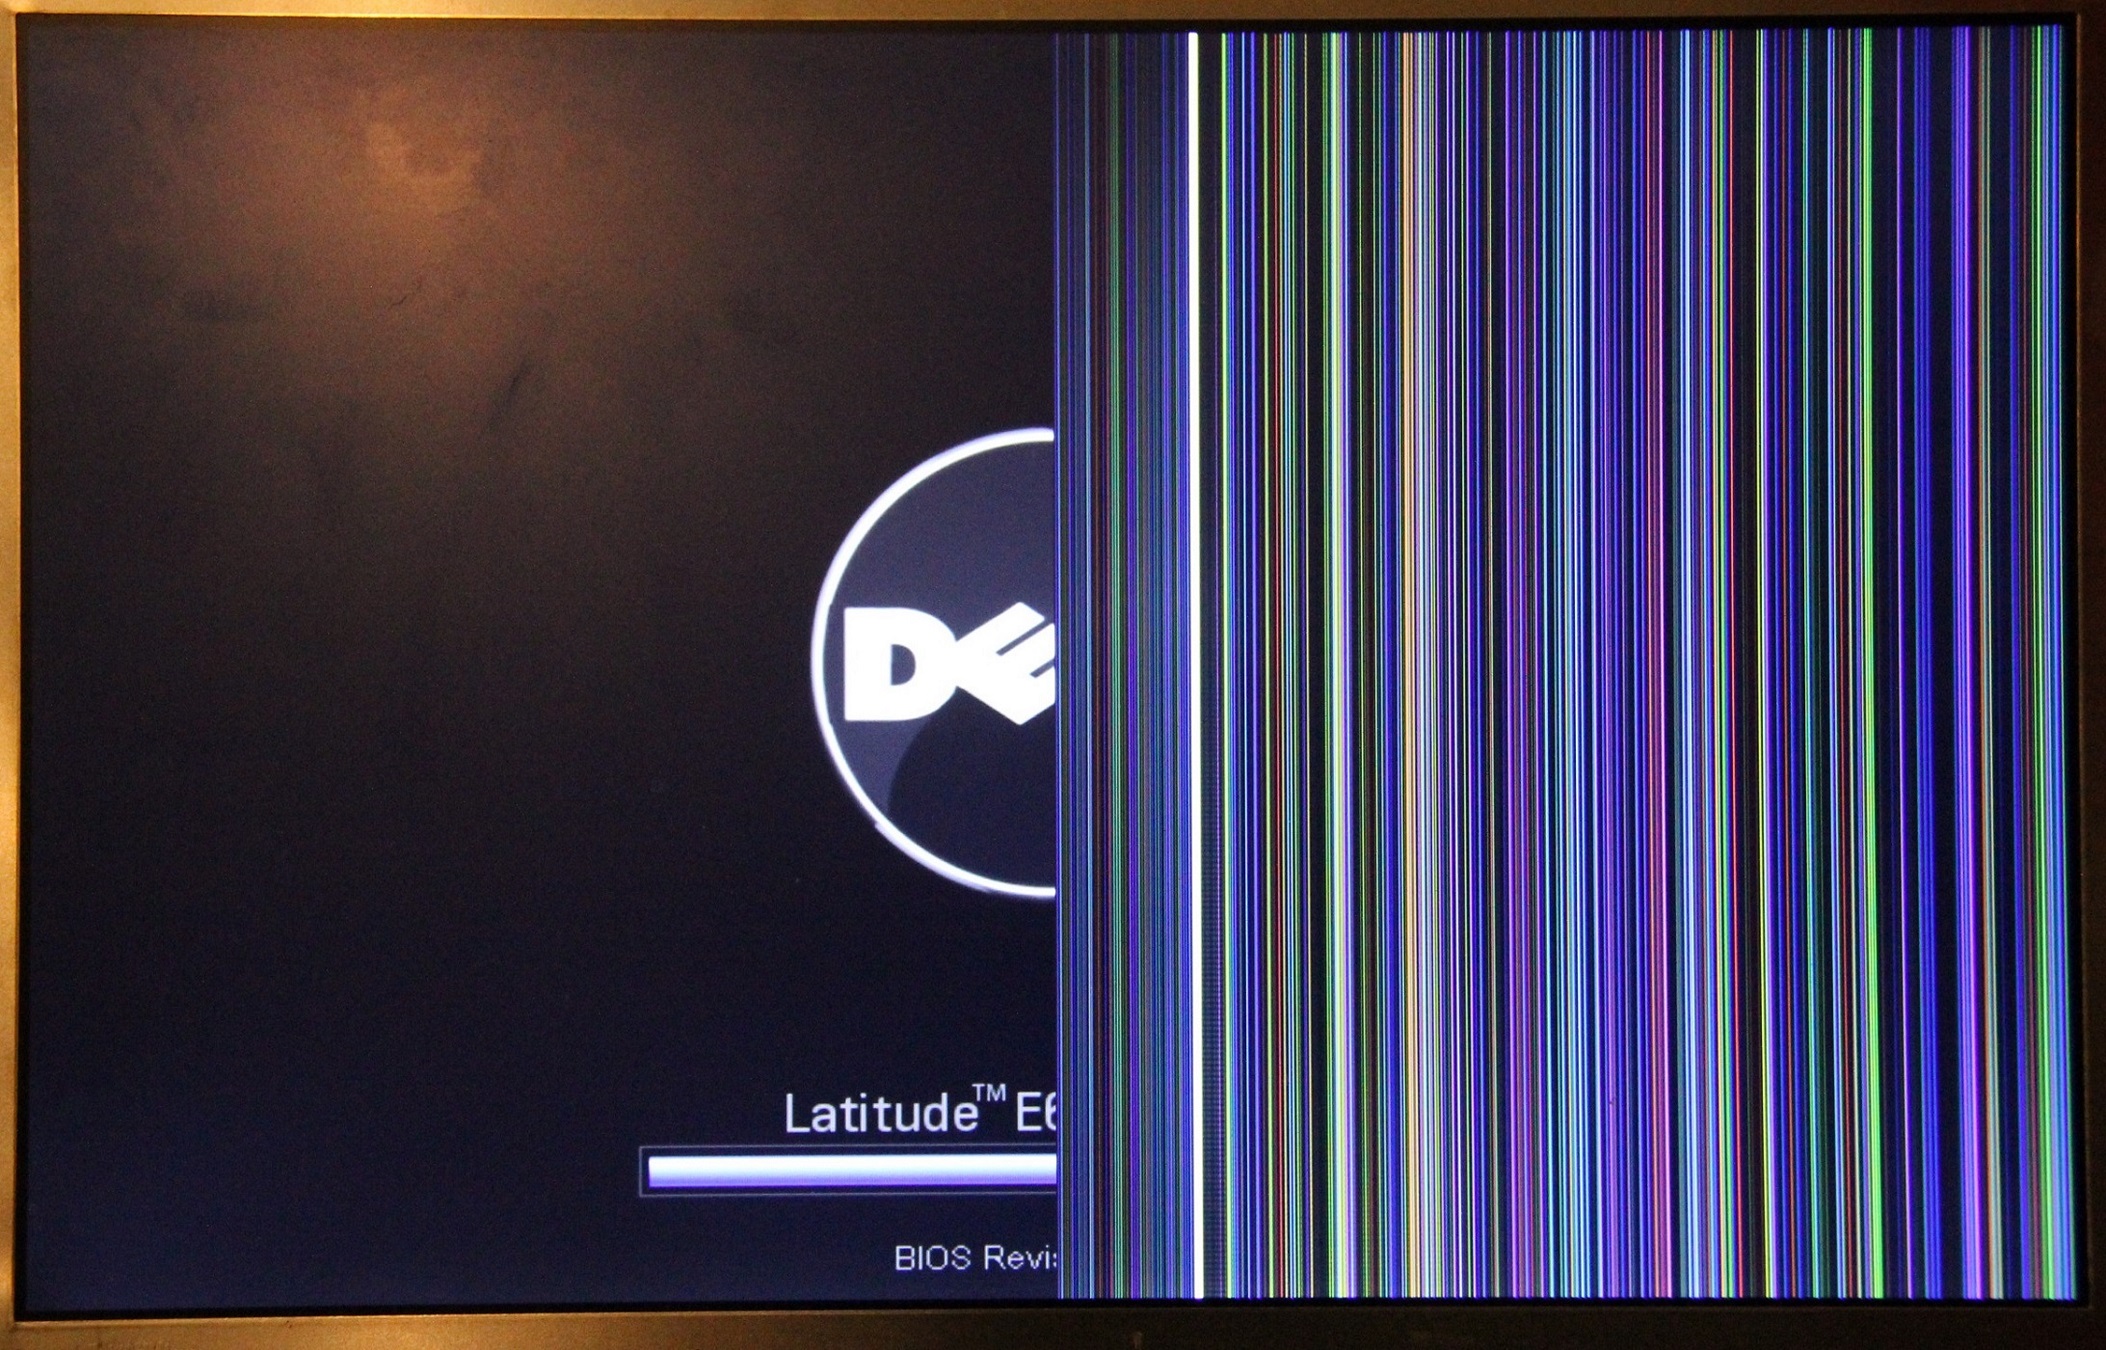 multicolored vertical lines indicating a damaged Dell display